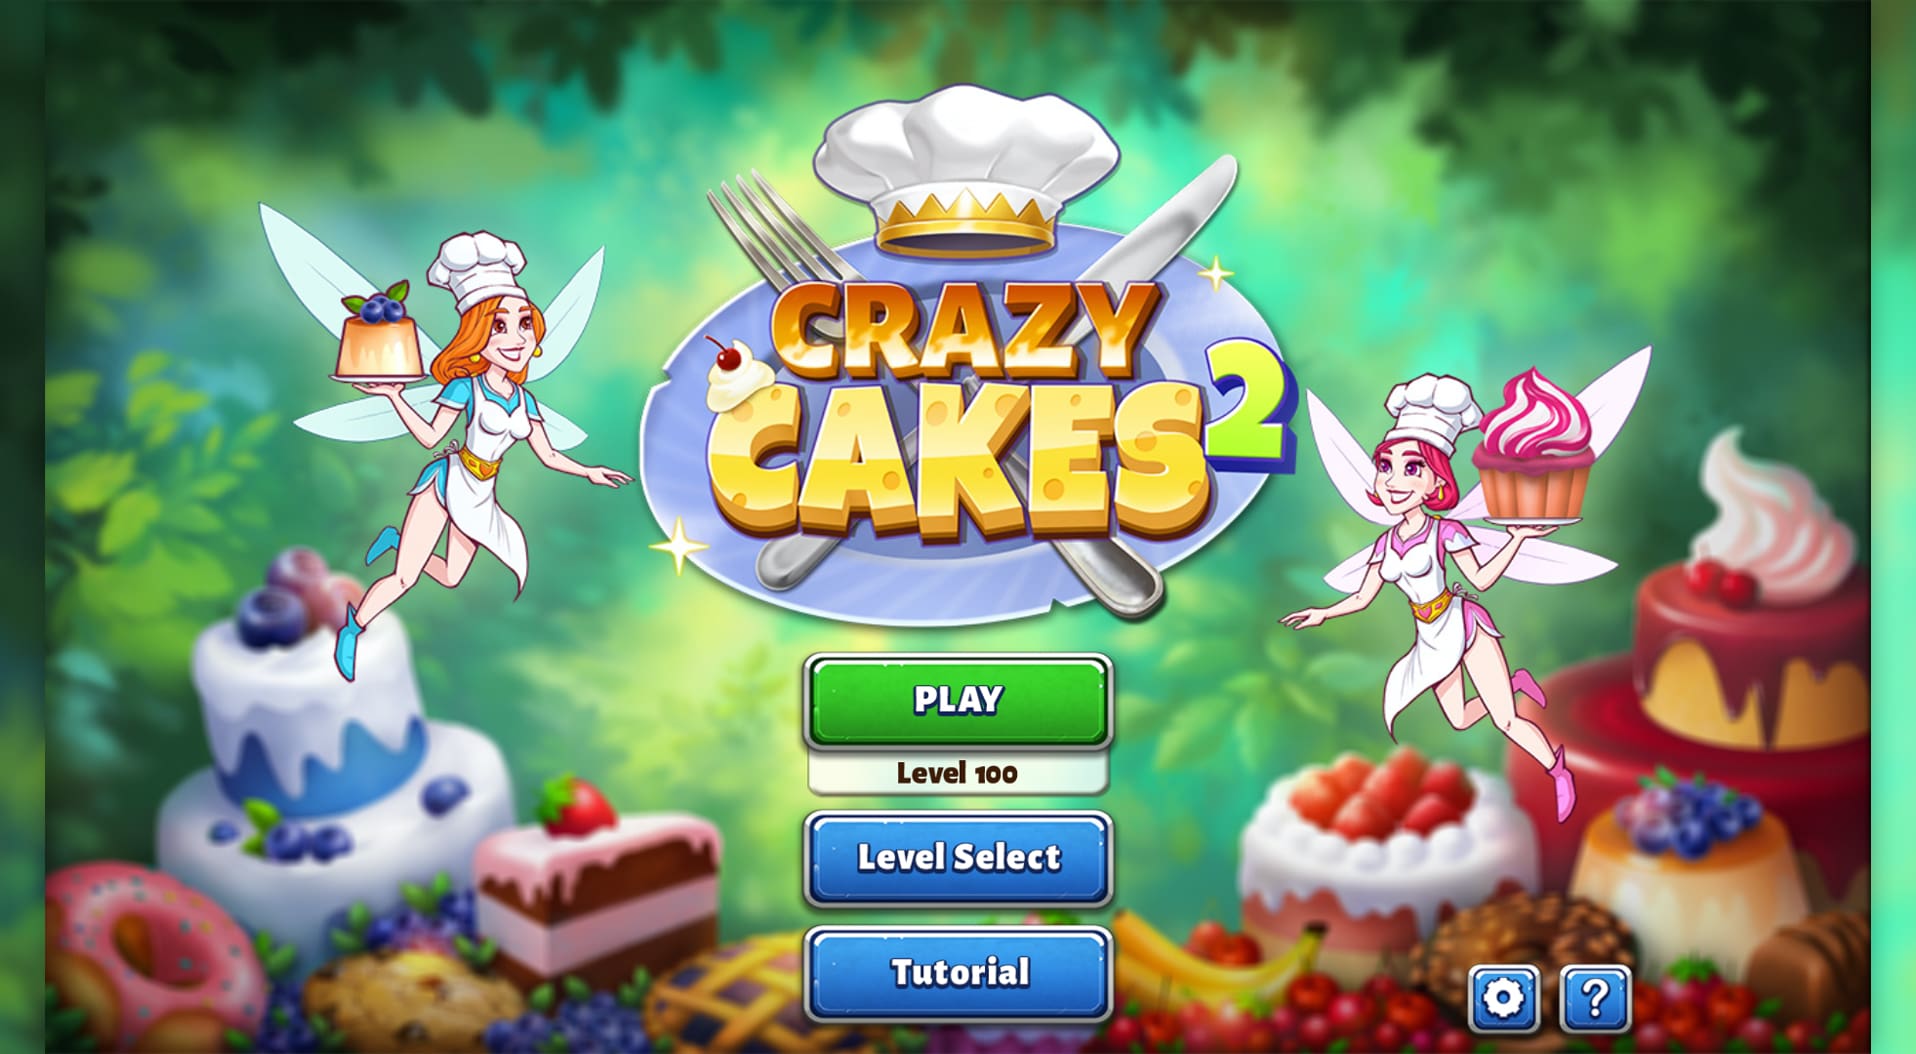 Crazy Cakes 2, Online Time Management Game